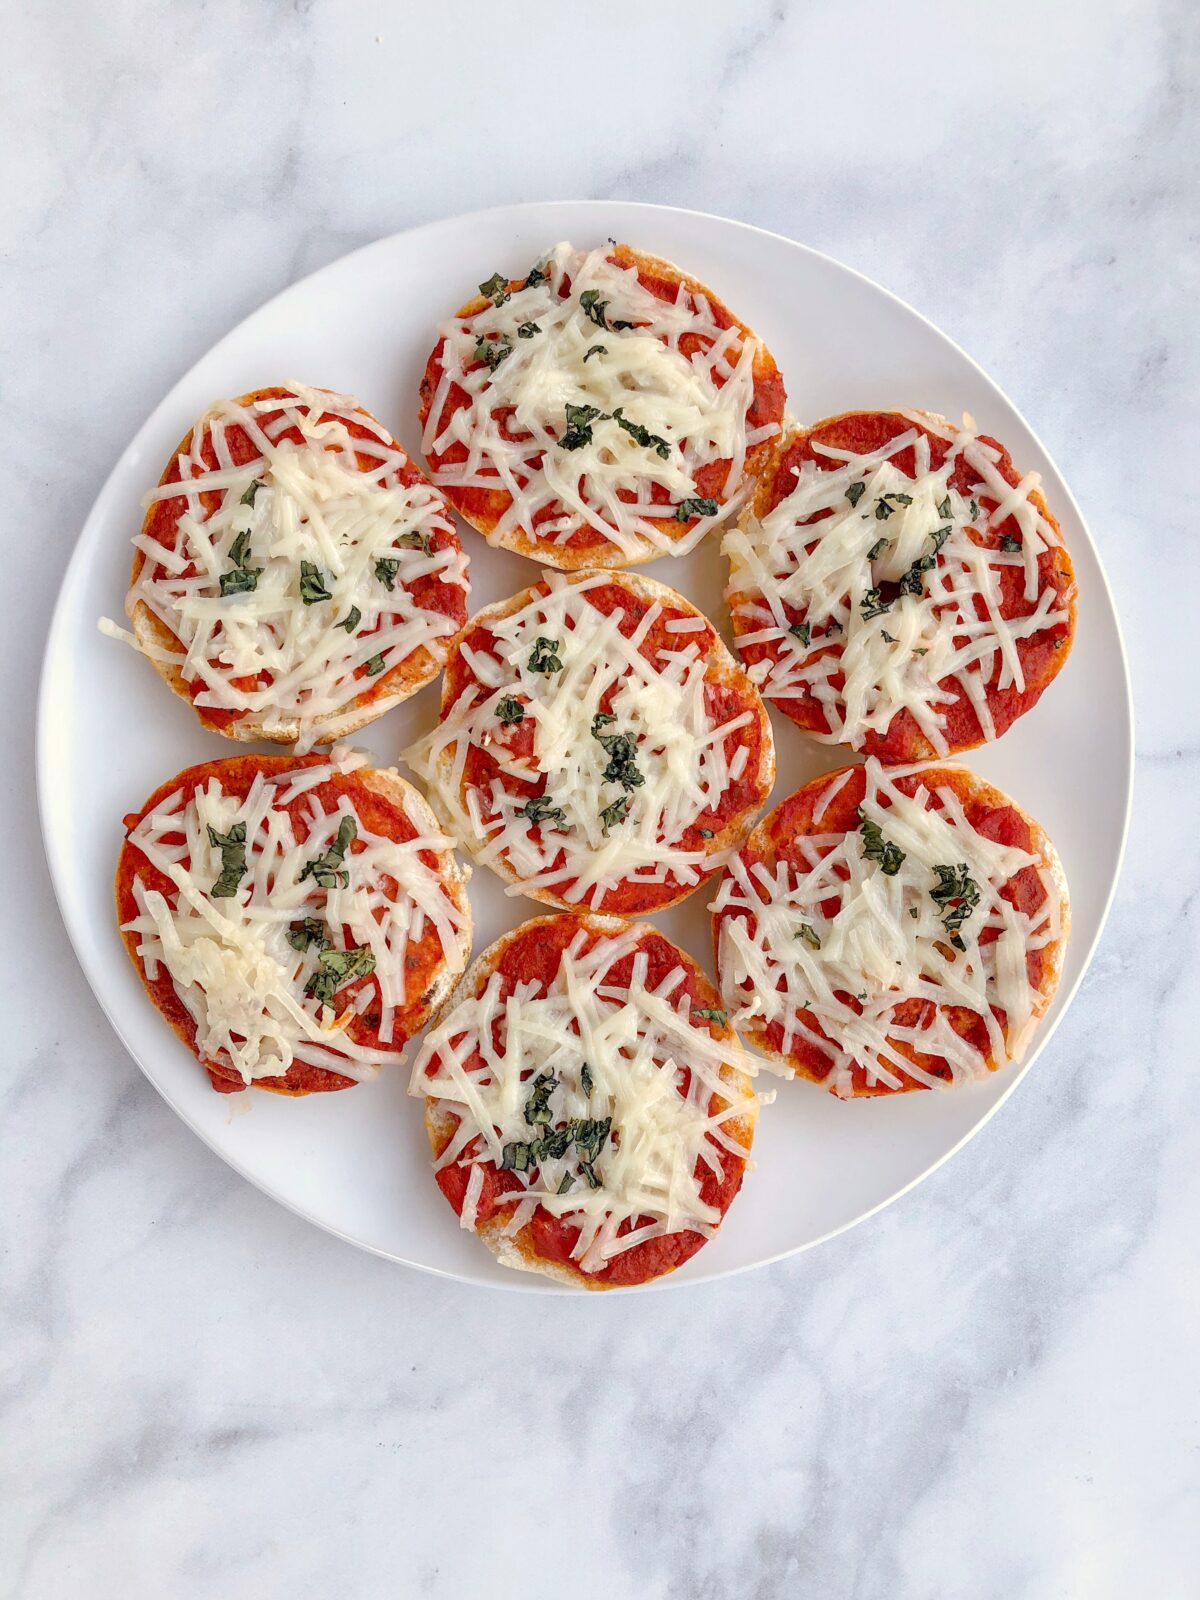 Homemade Vegan Bagel Bites are mini bagels topped with your favorite pizza ingredients then baked for 10 minutes. Quick and easy meatless meal!